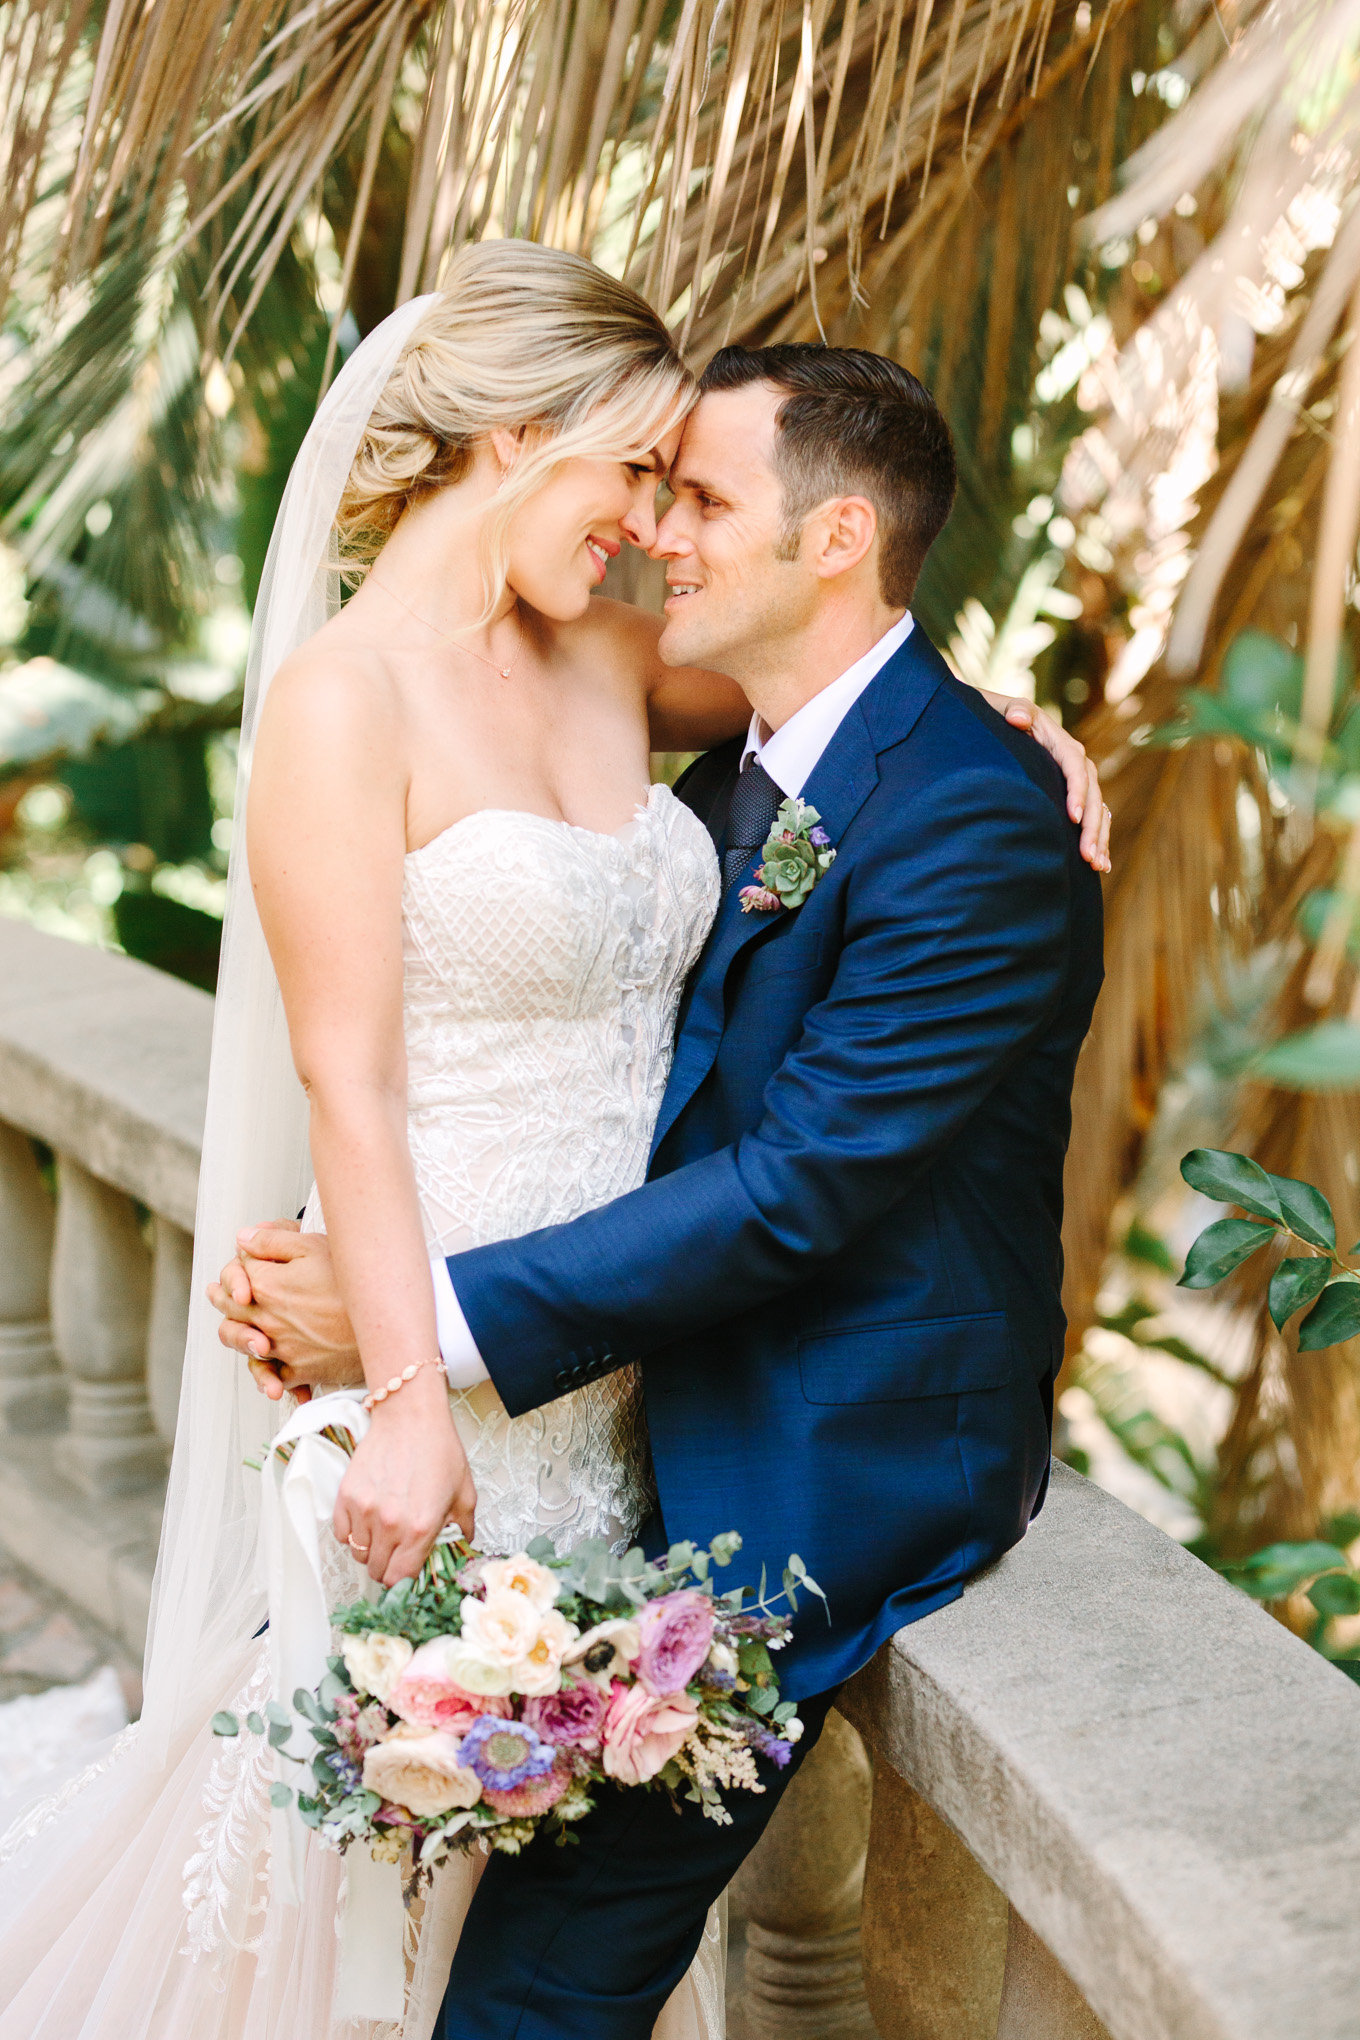 Bride and groom at Houdini Estate wedding | Best Southern California Garden Wedding Venues | Colorful and elevated wedding photography for fun-loving couples | #gardenvenue #weddingvenue #socalweddingvenue #bouquetideas #uniquebouquet   Source: Mary Costa Photography | Los Angeles 